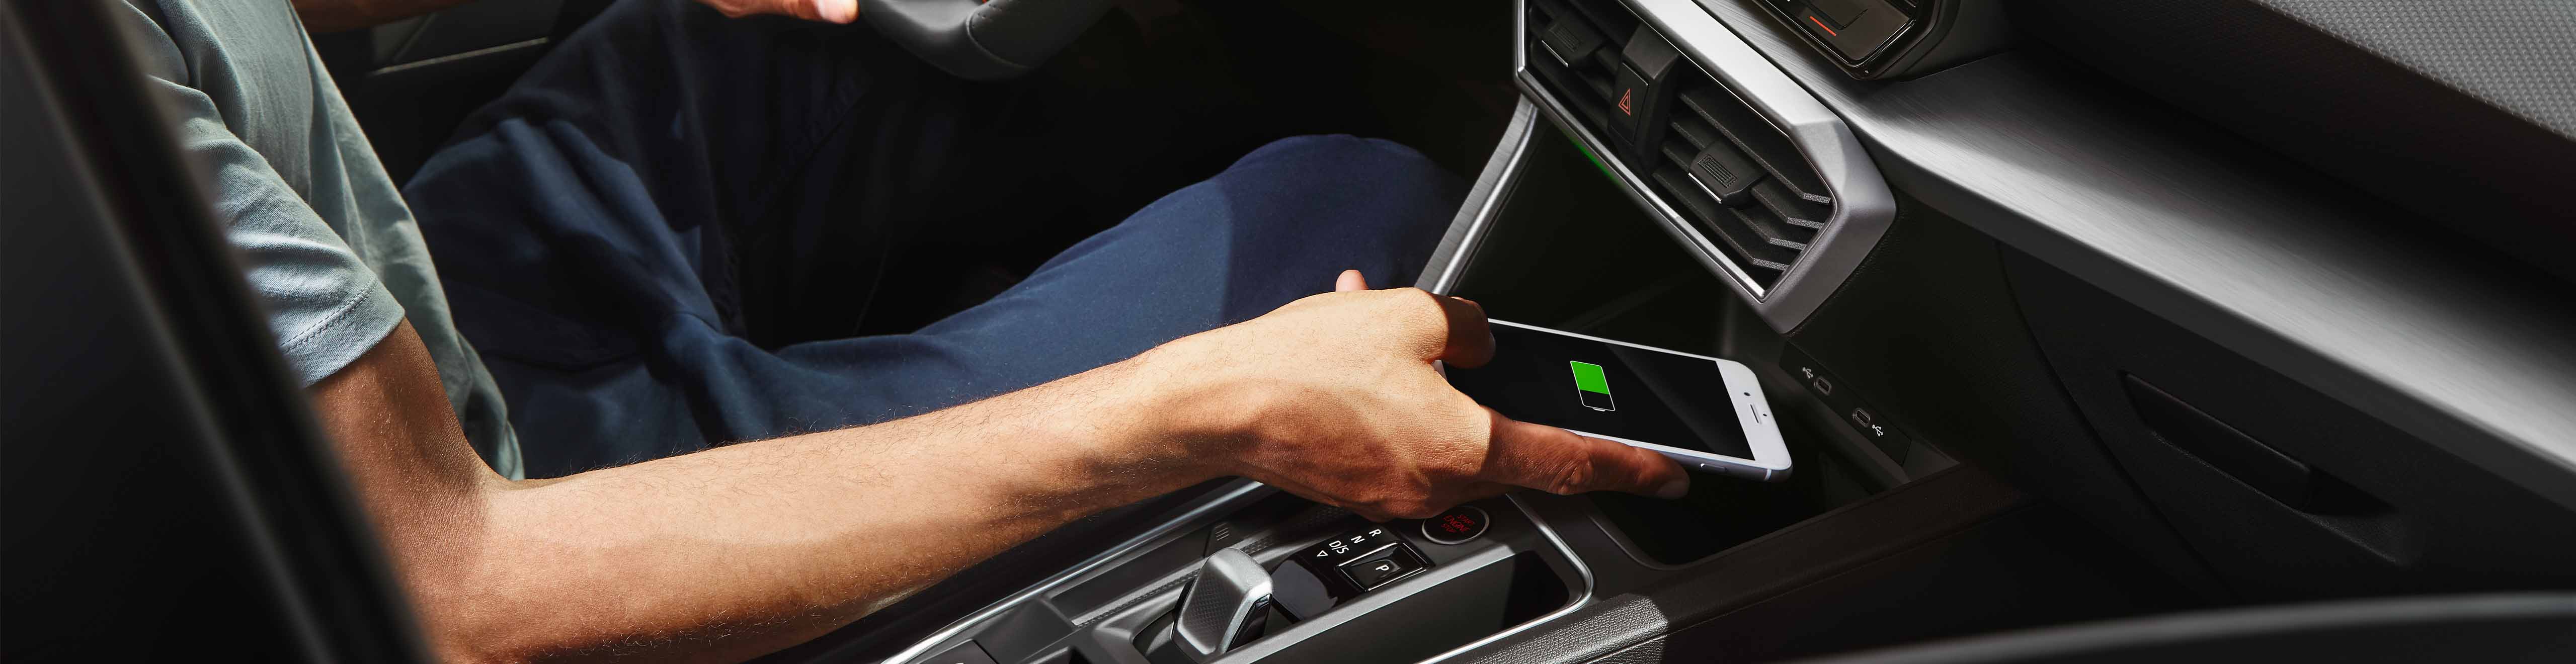 man-inside-seat-leon-conecting-the-phone 